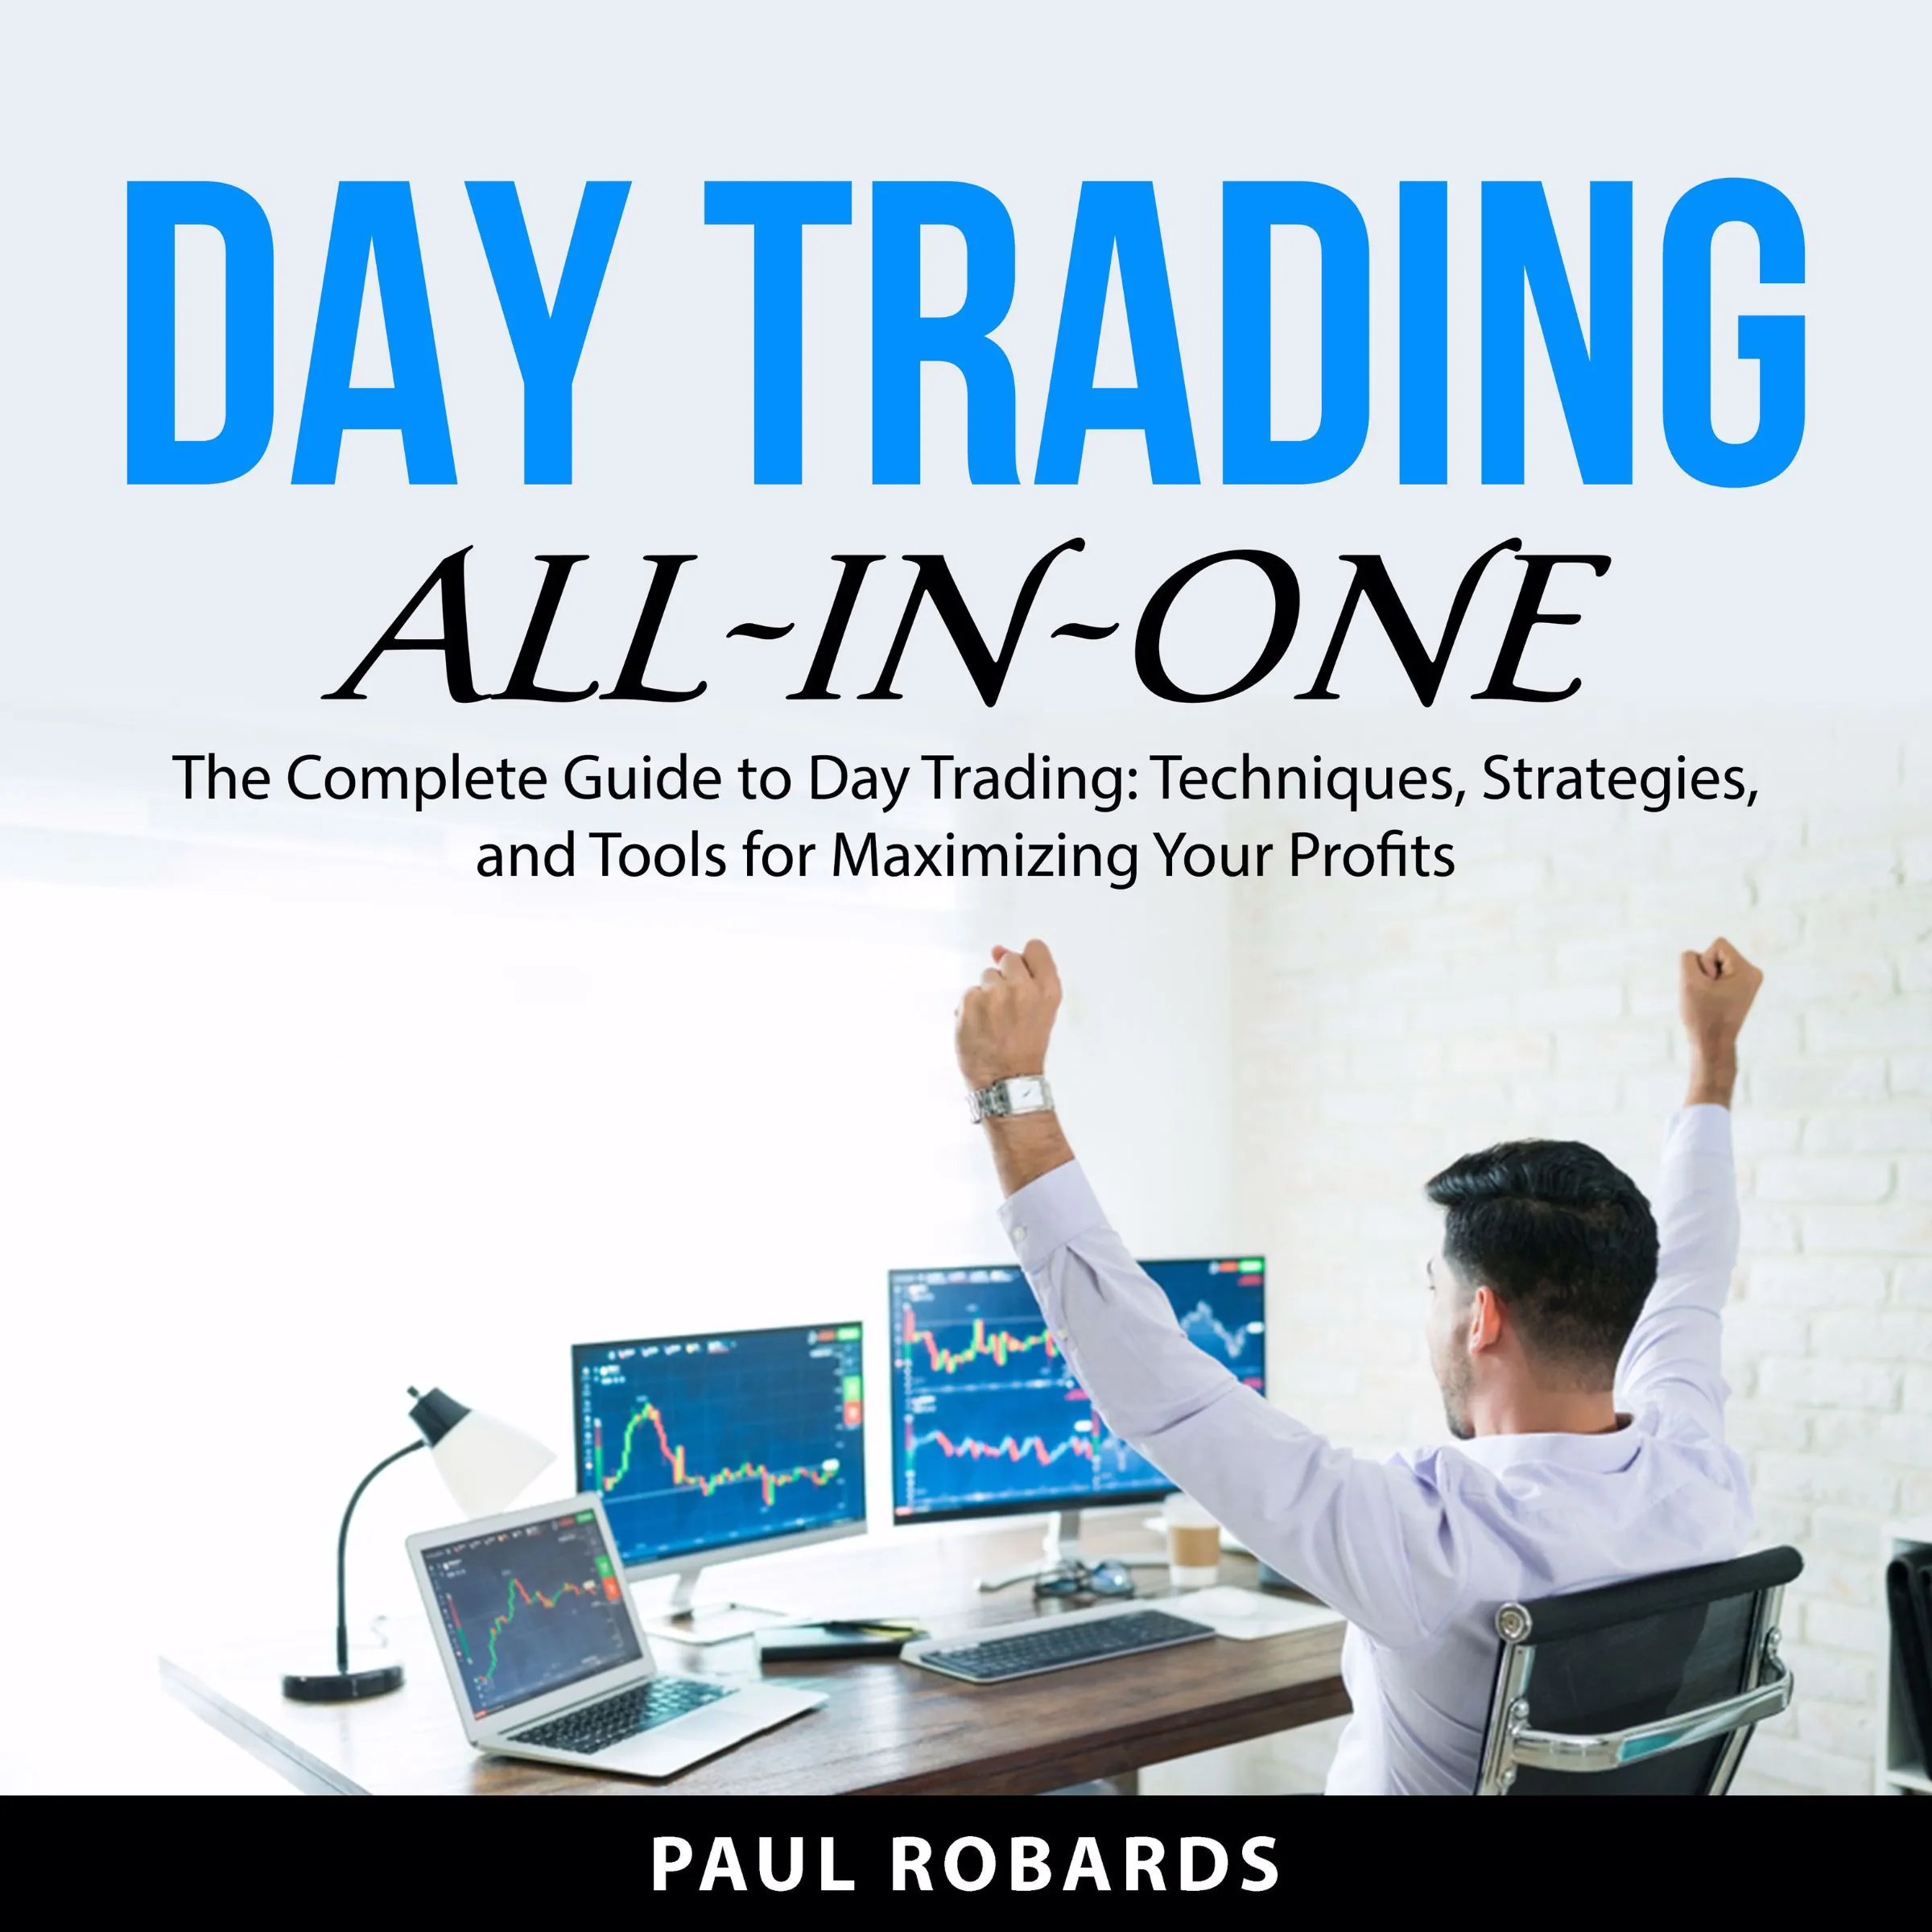 Day Trading All-in-One Audiobook by Paul Robards